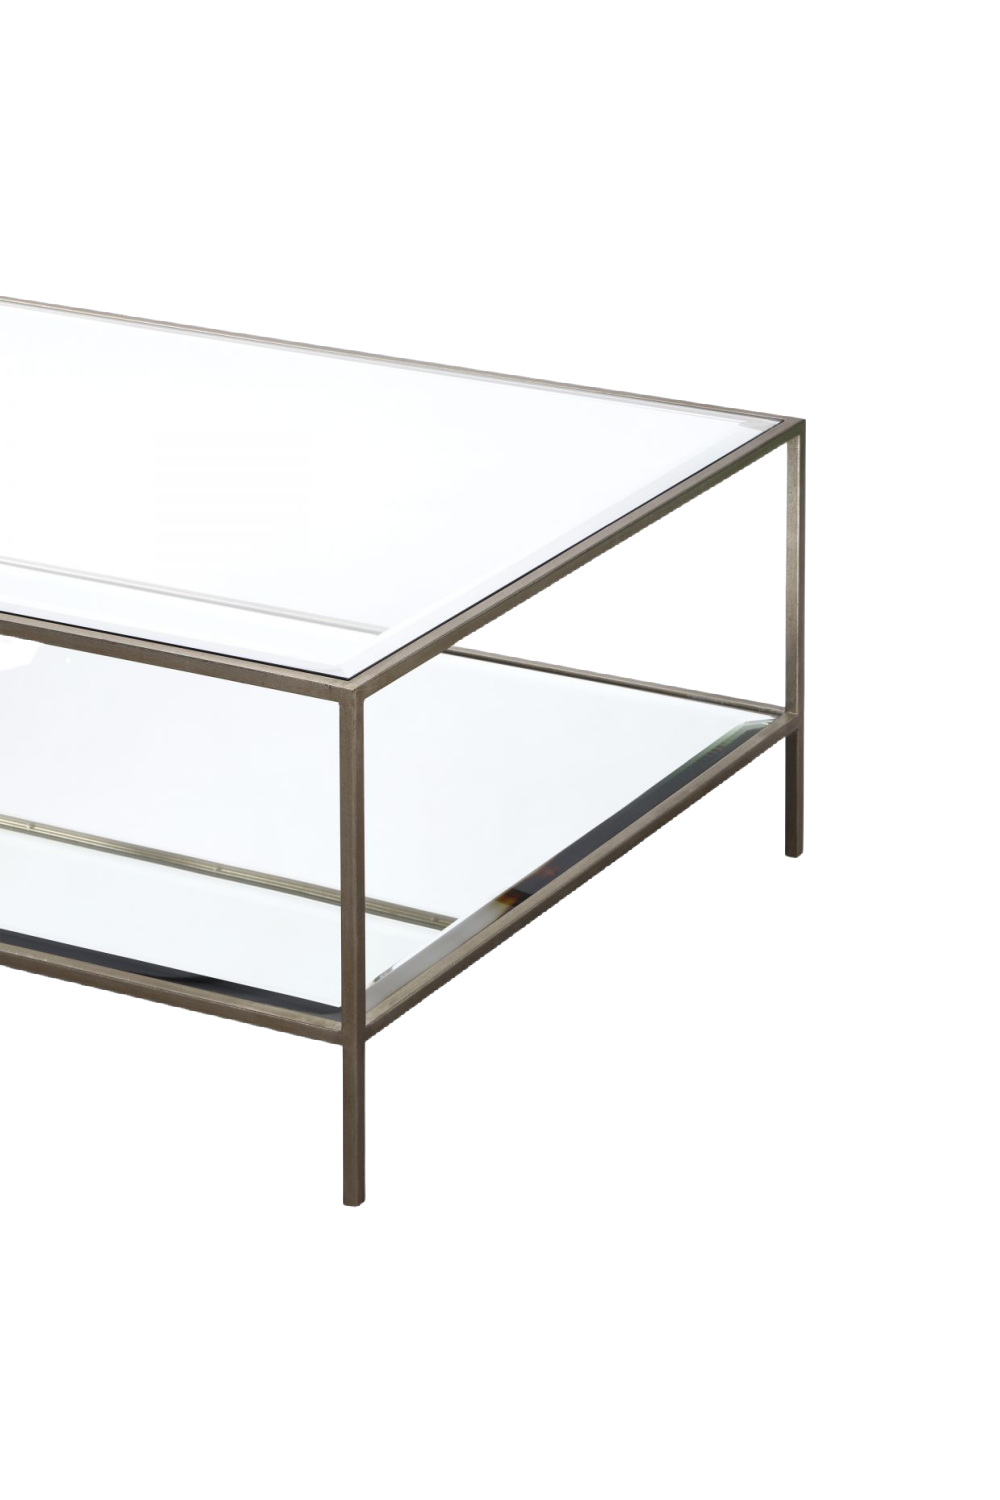 Two-Tier Silver Glass Coffee Table | Liang & Eimil Oliver | OROA.com